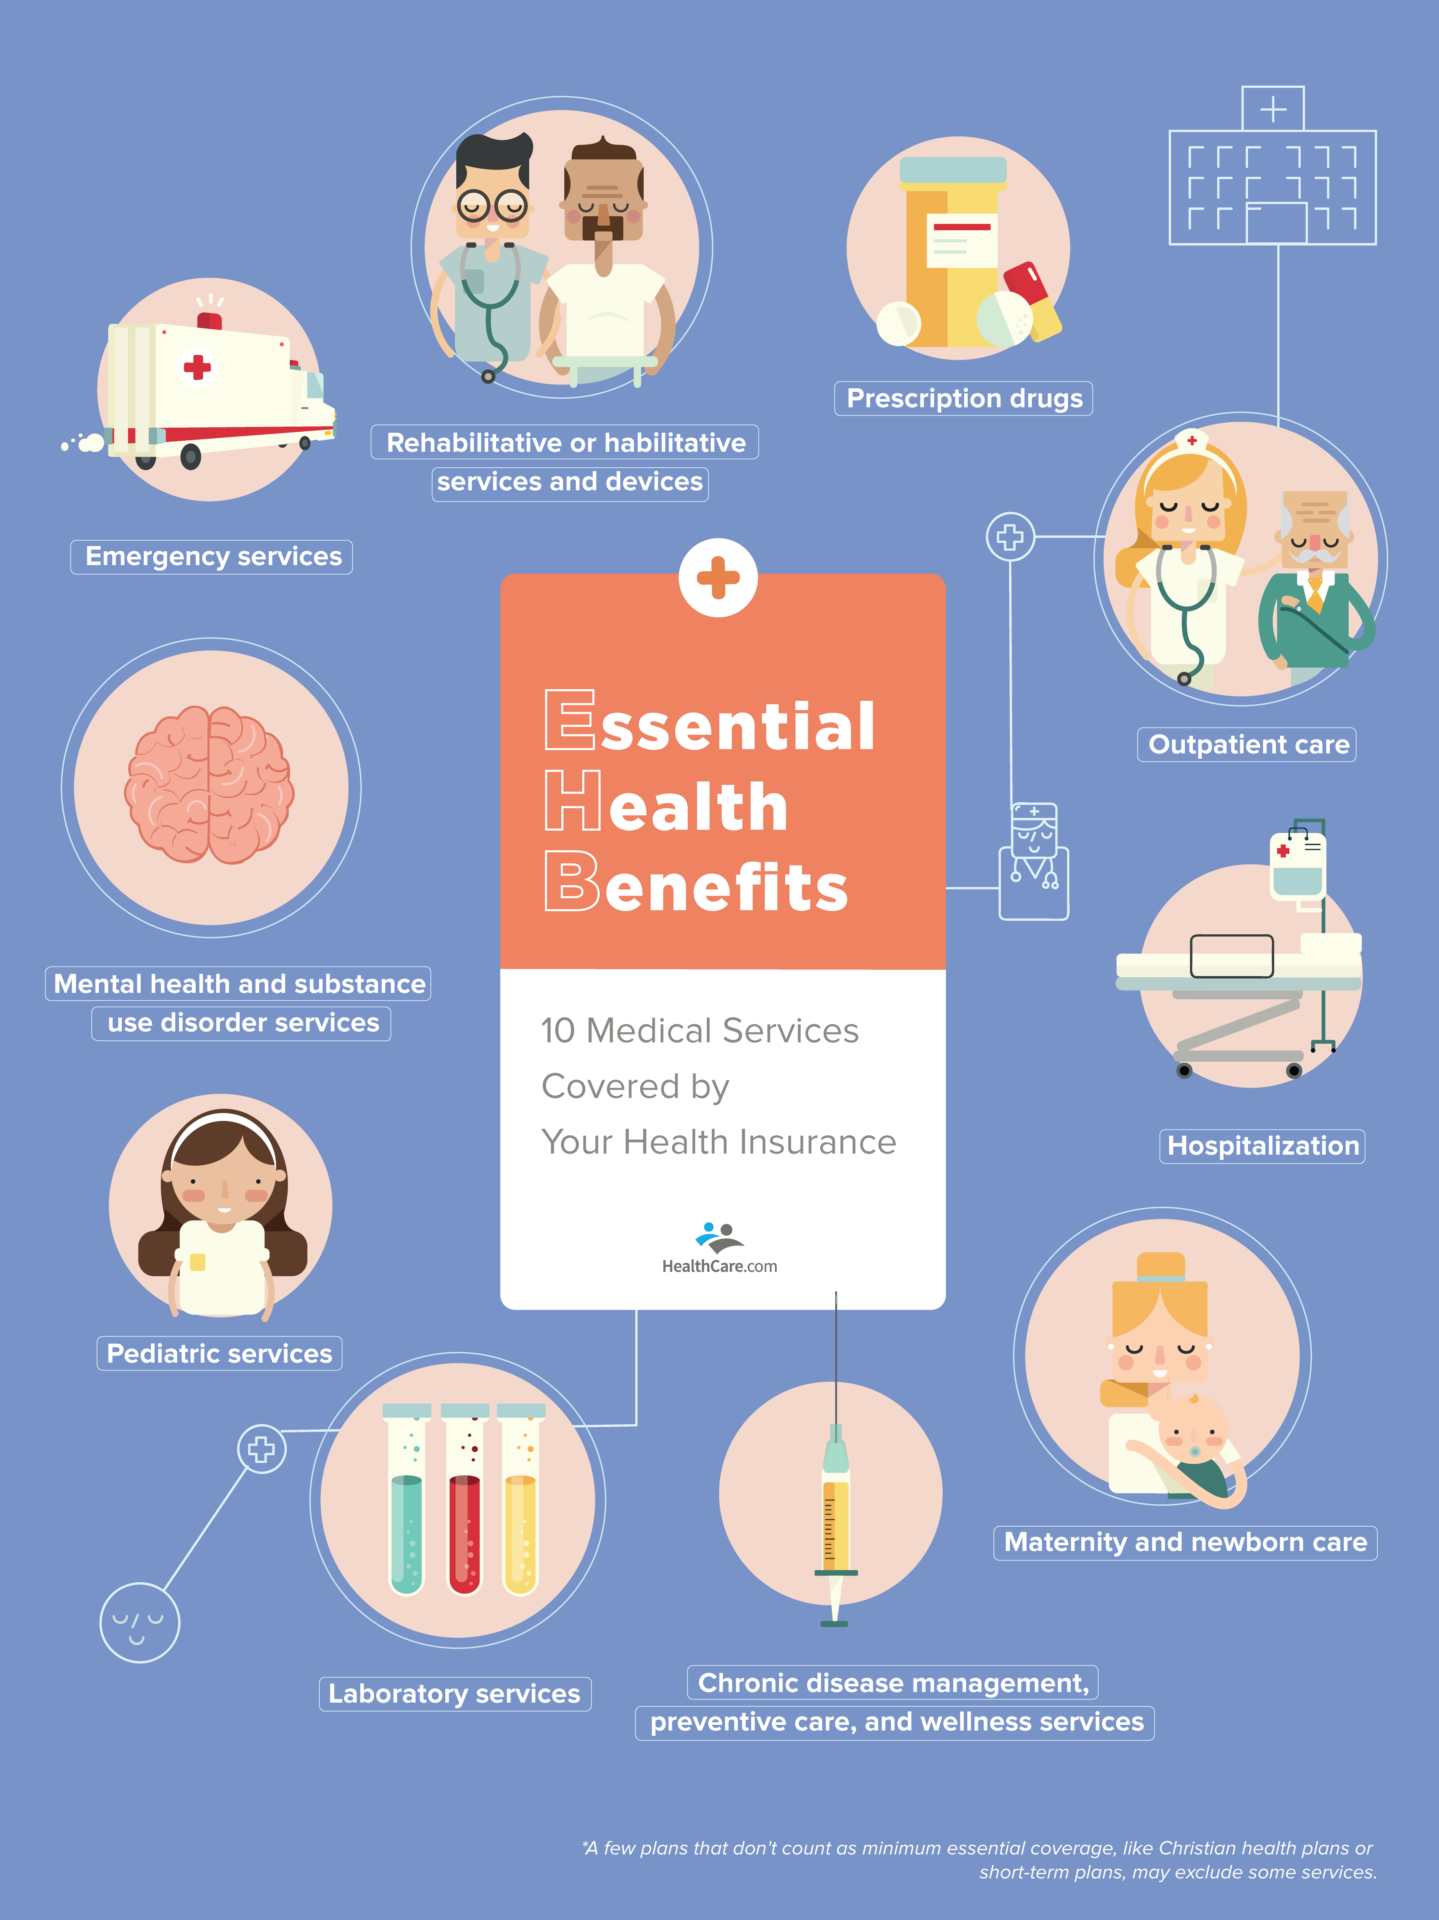 research about health benefits